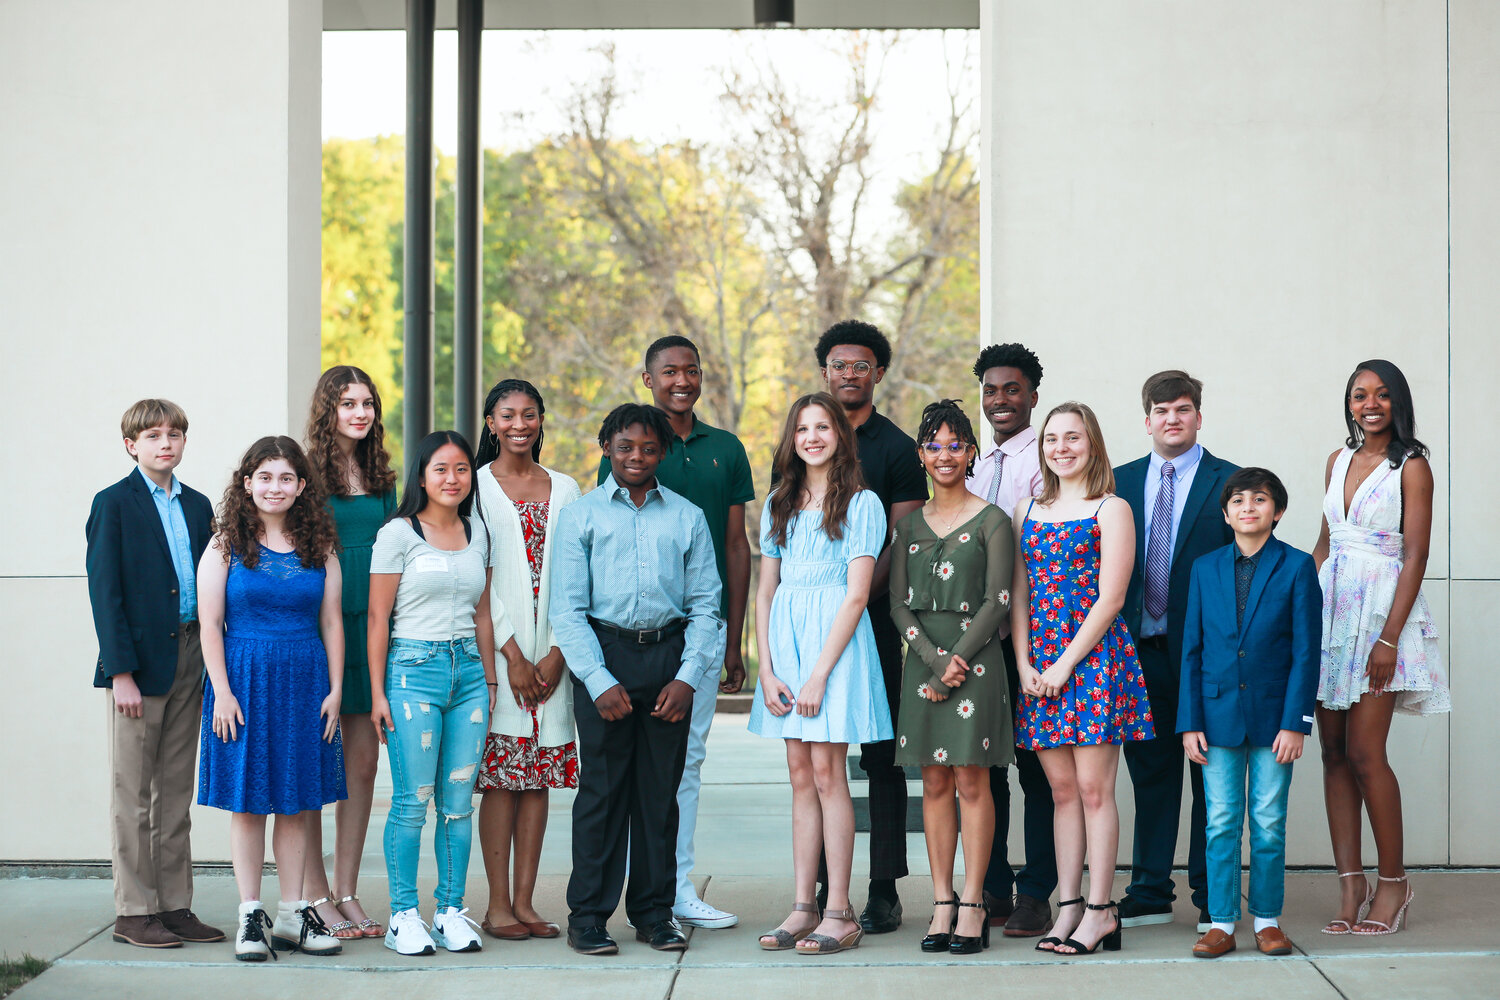 St. Andrew's students who attended the annual Merit Scholars Dinner last spring were (from left, back) Grady Fields, Adriana Kroeze, Casey Young, Chase Jenkins, Ant Jones, Ahmir Hoskins, Oliver Dawson, and Victoria Akins; (front) Melissa Khadivi, Jessica Chen, Evan Arthur White, Maddie Grace McCoy, Anaya Morgan, Jasper Jones, and Enrique Arambula.